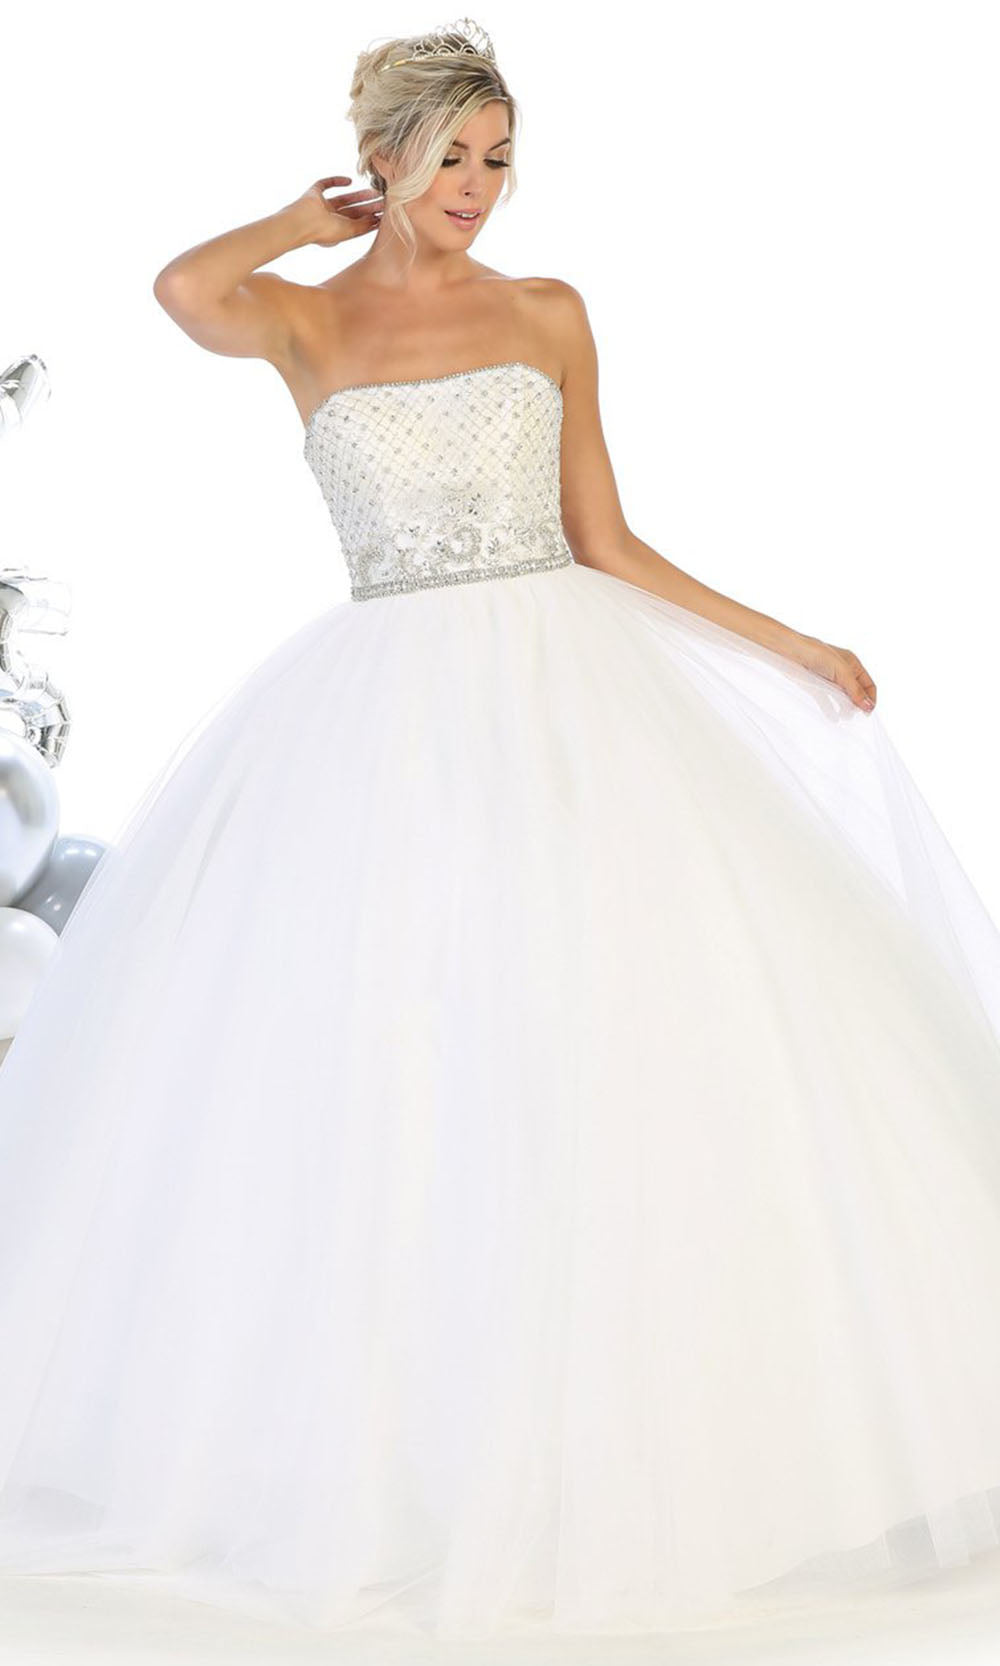 May Queen - LK114 Strapless Adorned Ballgown In White